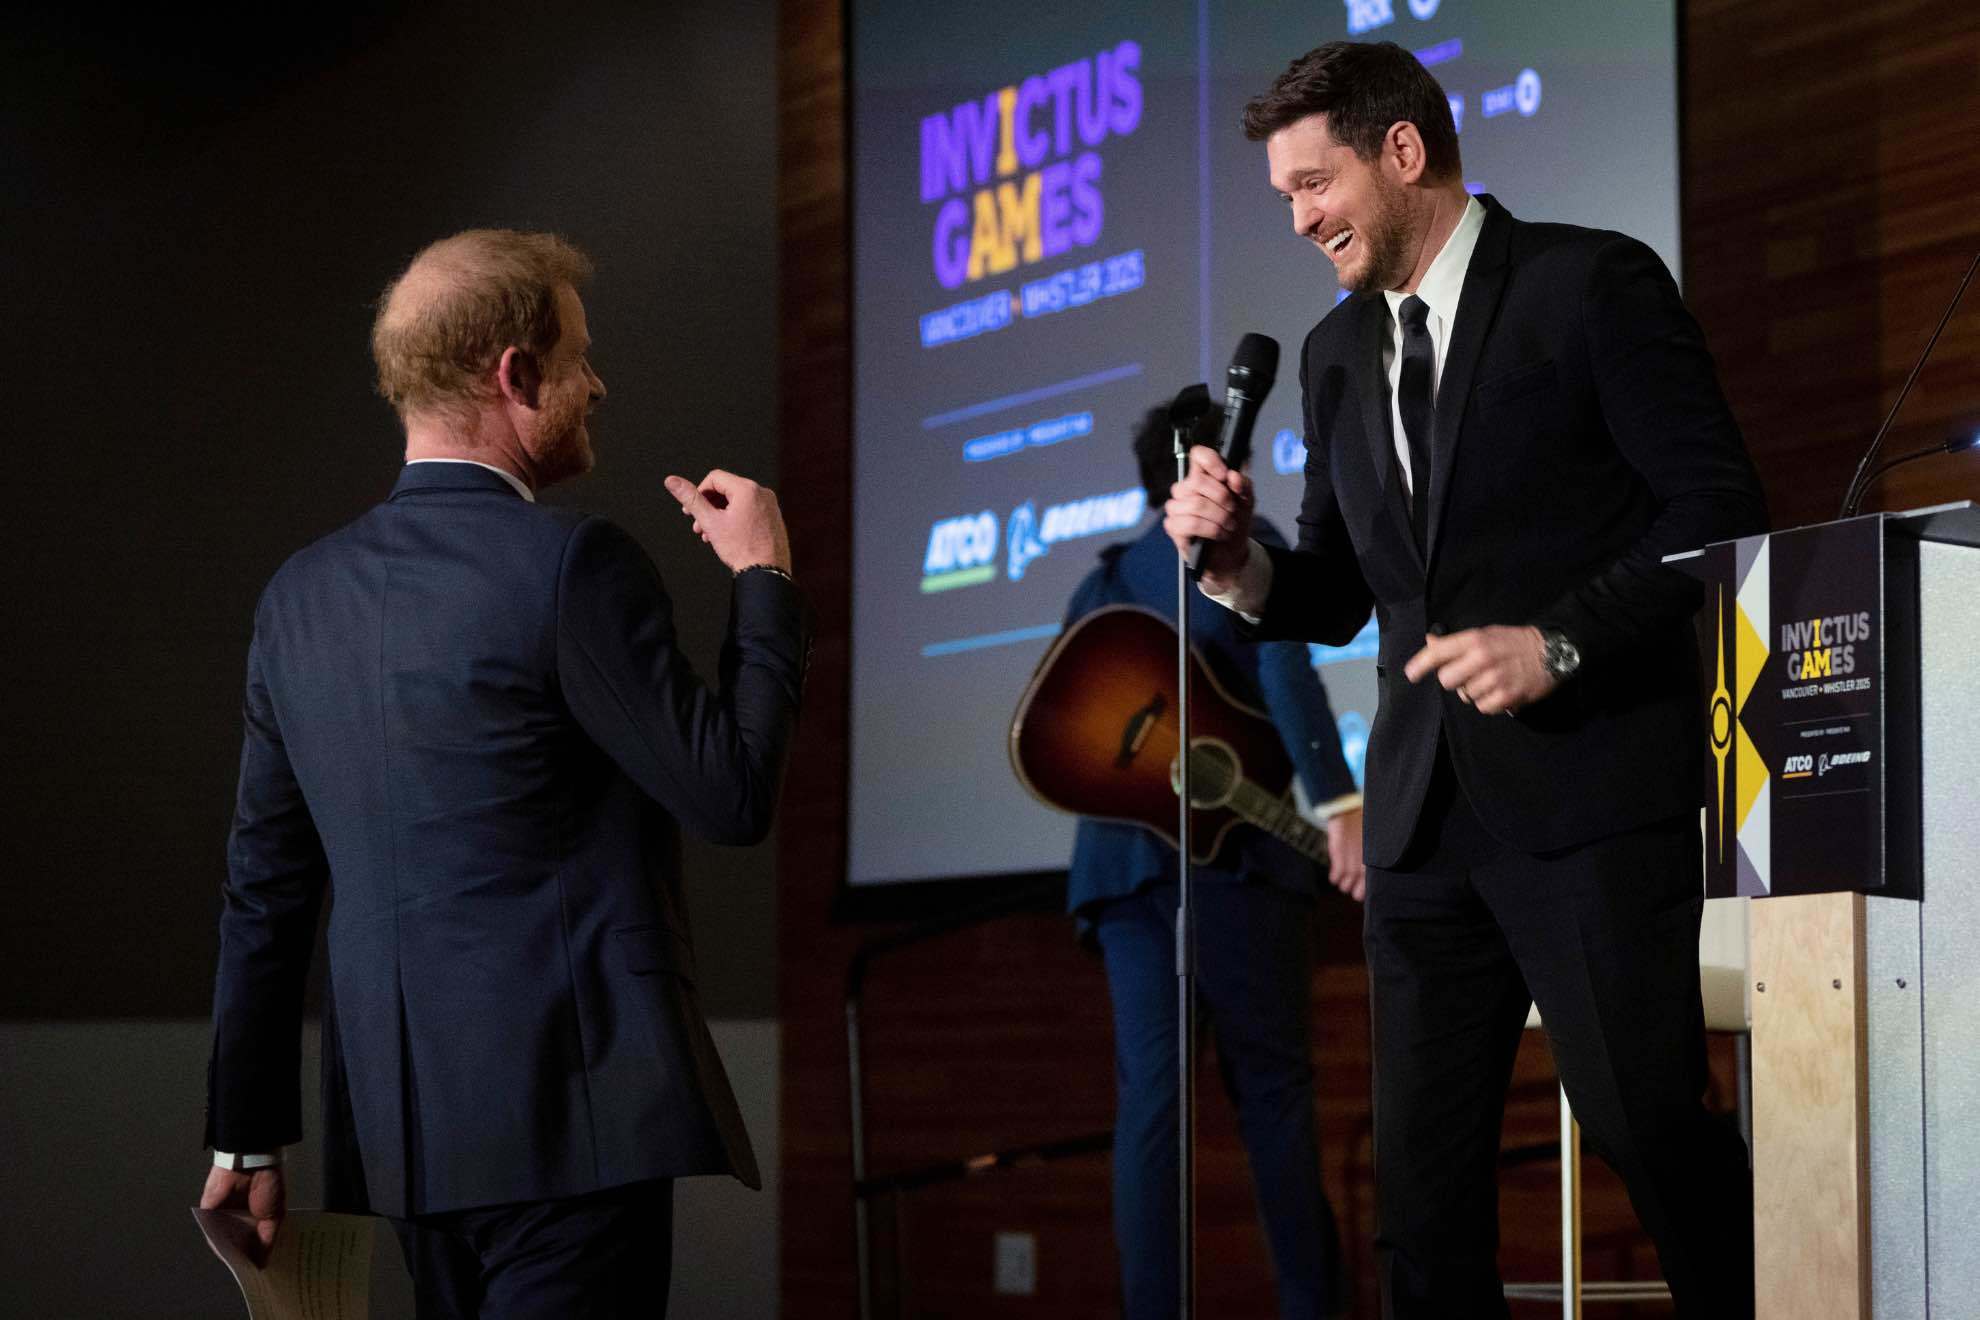 Michael Bublé sang a Frank Sinatra classic with personal lyrics for Prince Harry